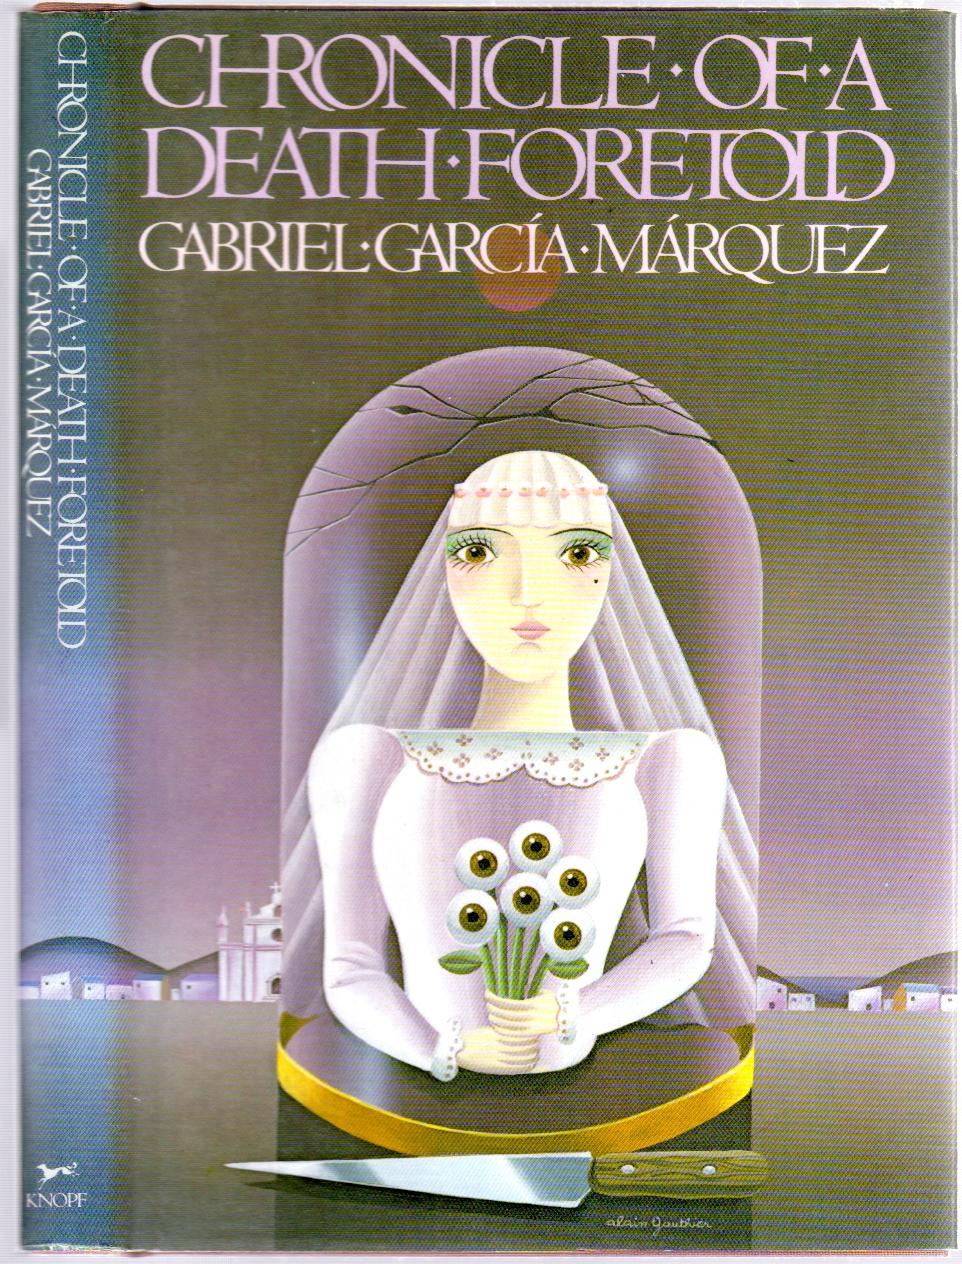 a　by　Death　Foretold　GARCÍA　Hardcover　MÁRQUEZ,　Covers-Rare　Gabriel:　Fine　(1983)　Between　the　Books,　Inc.　ABAA　Chronicle　of